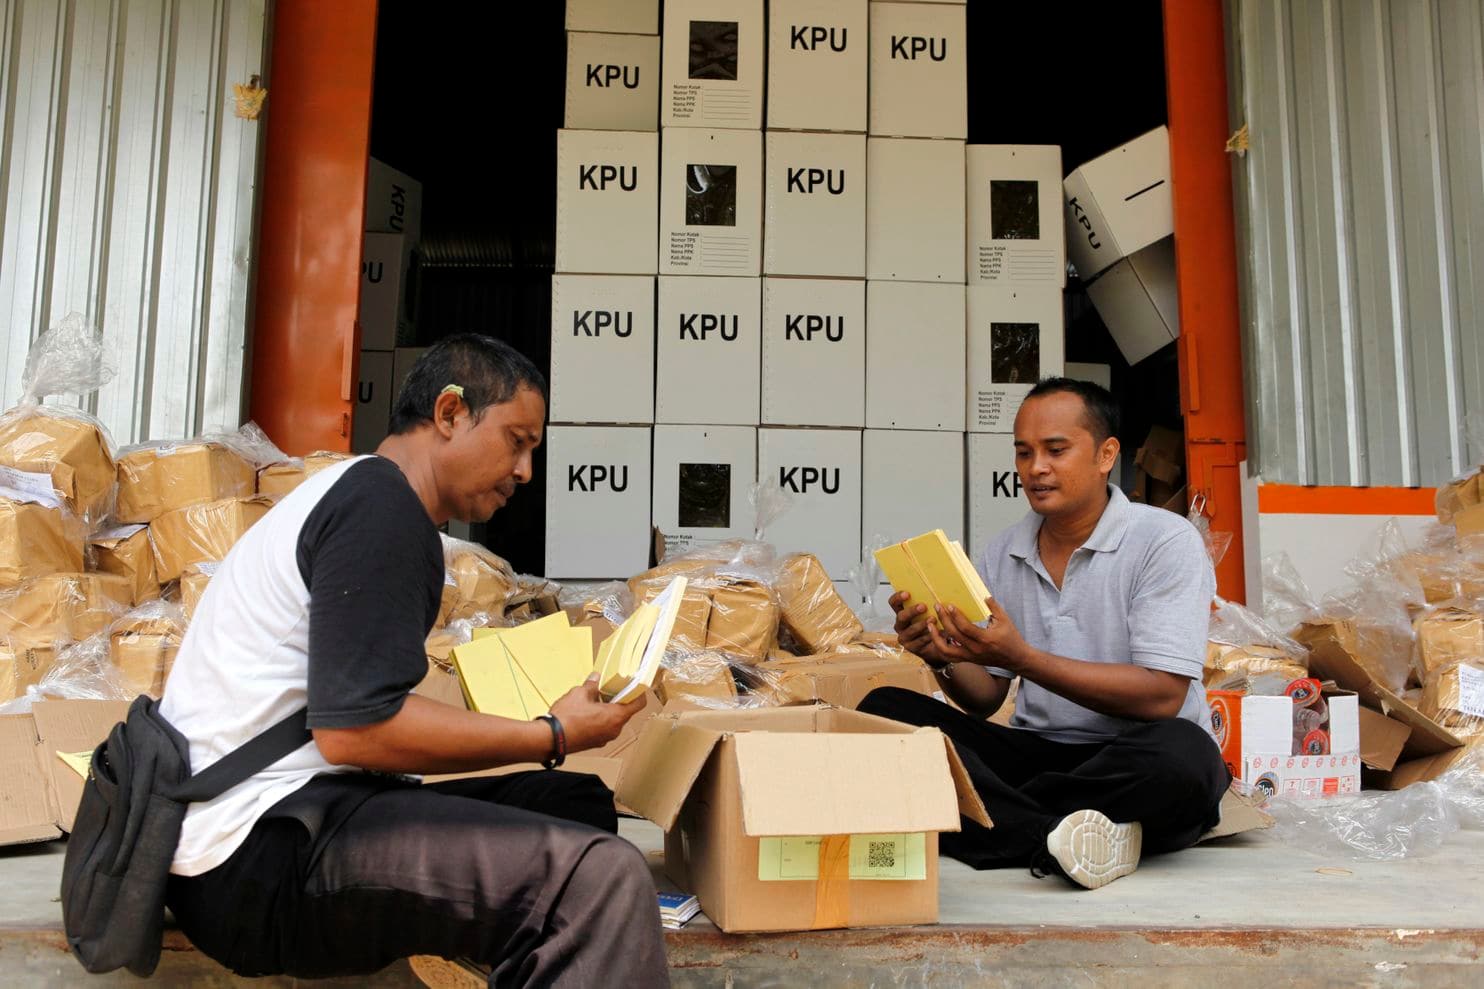 Over 20,000 Marked Ballot Papers From Indonesia Found in Bangi & Kajang Days Before General Election - WORLD OF BUZZ